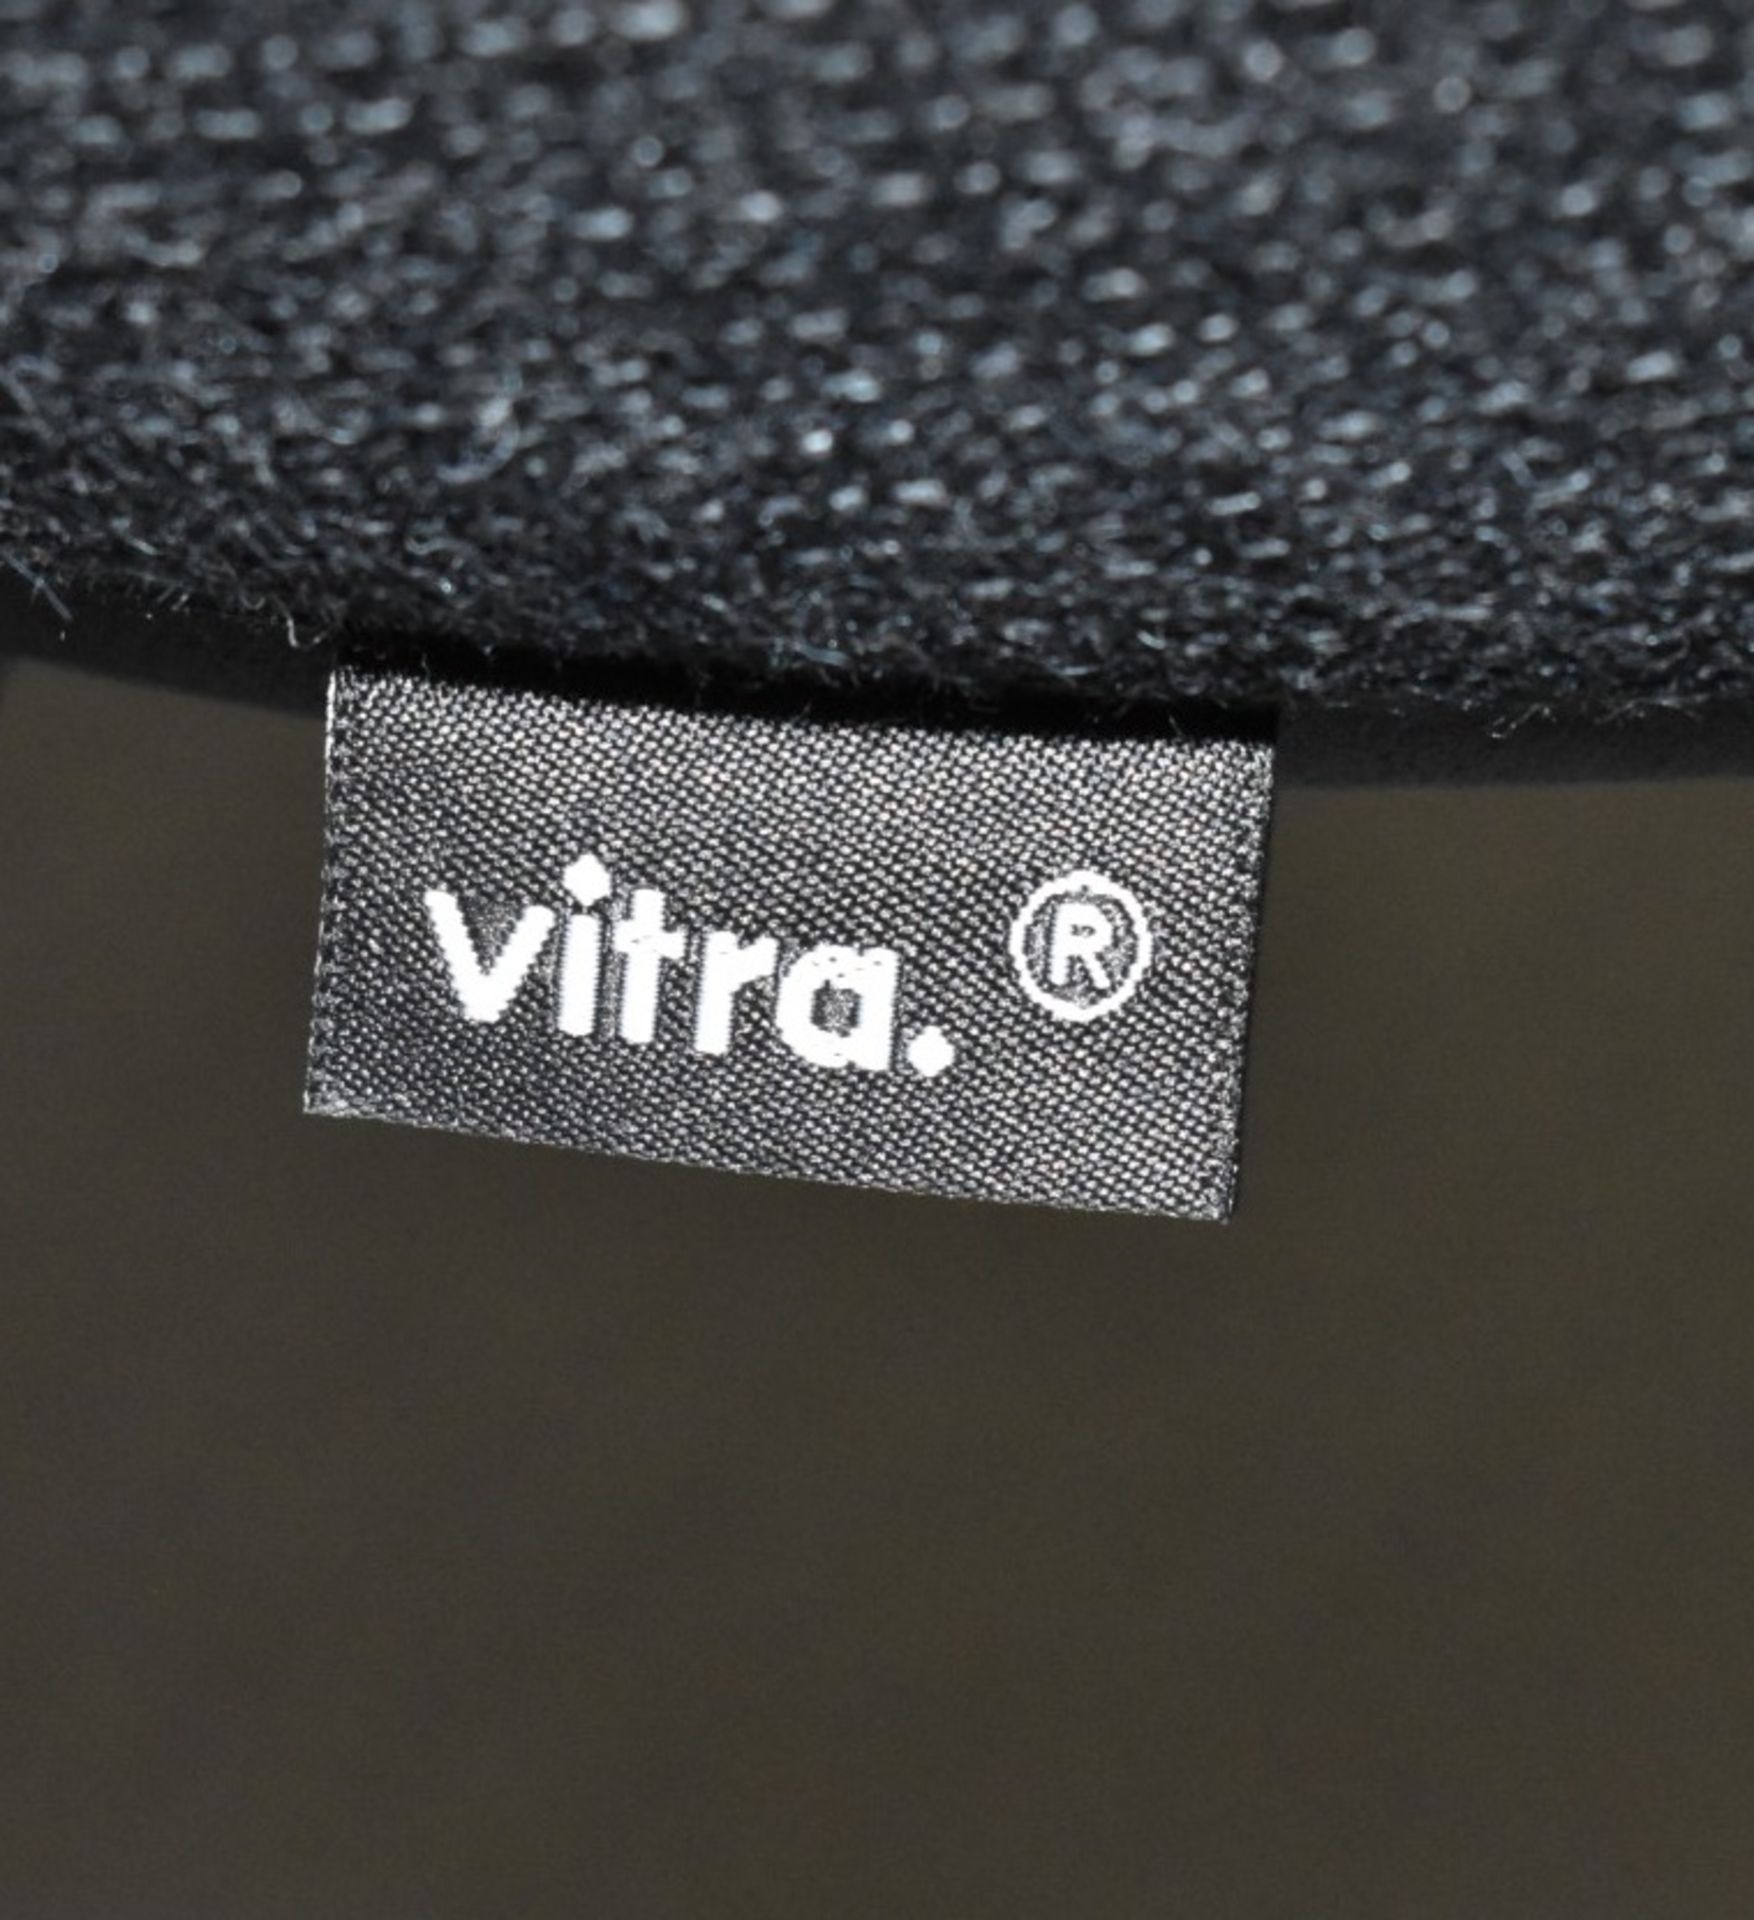 1 x VITRA 'Softshell' Fabric Upholstered Designer Plastic Armchair, in Anthracite Grey - RRP £885.00 - Image 2 of 9